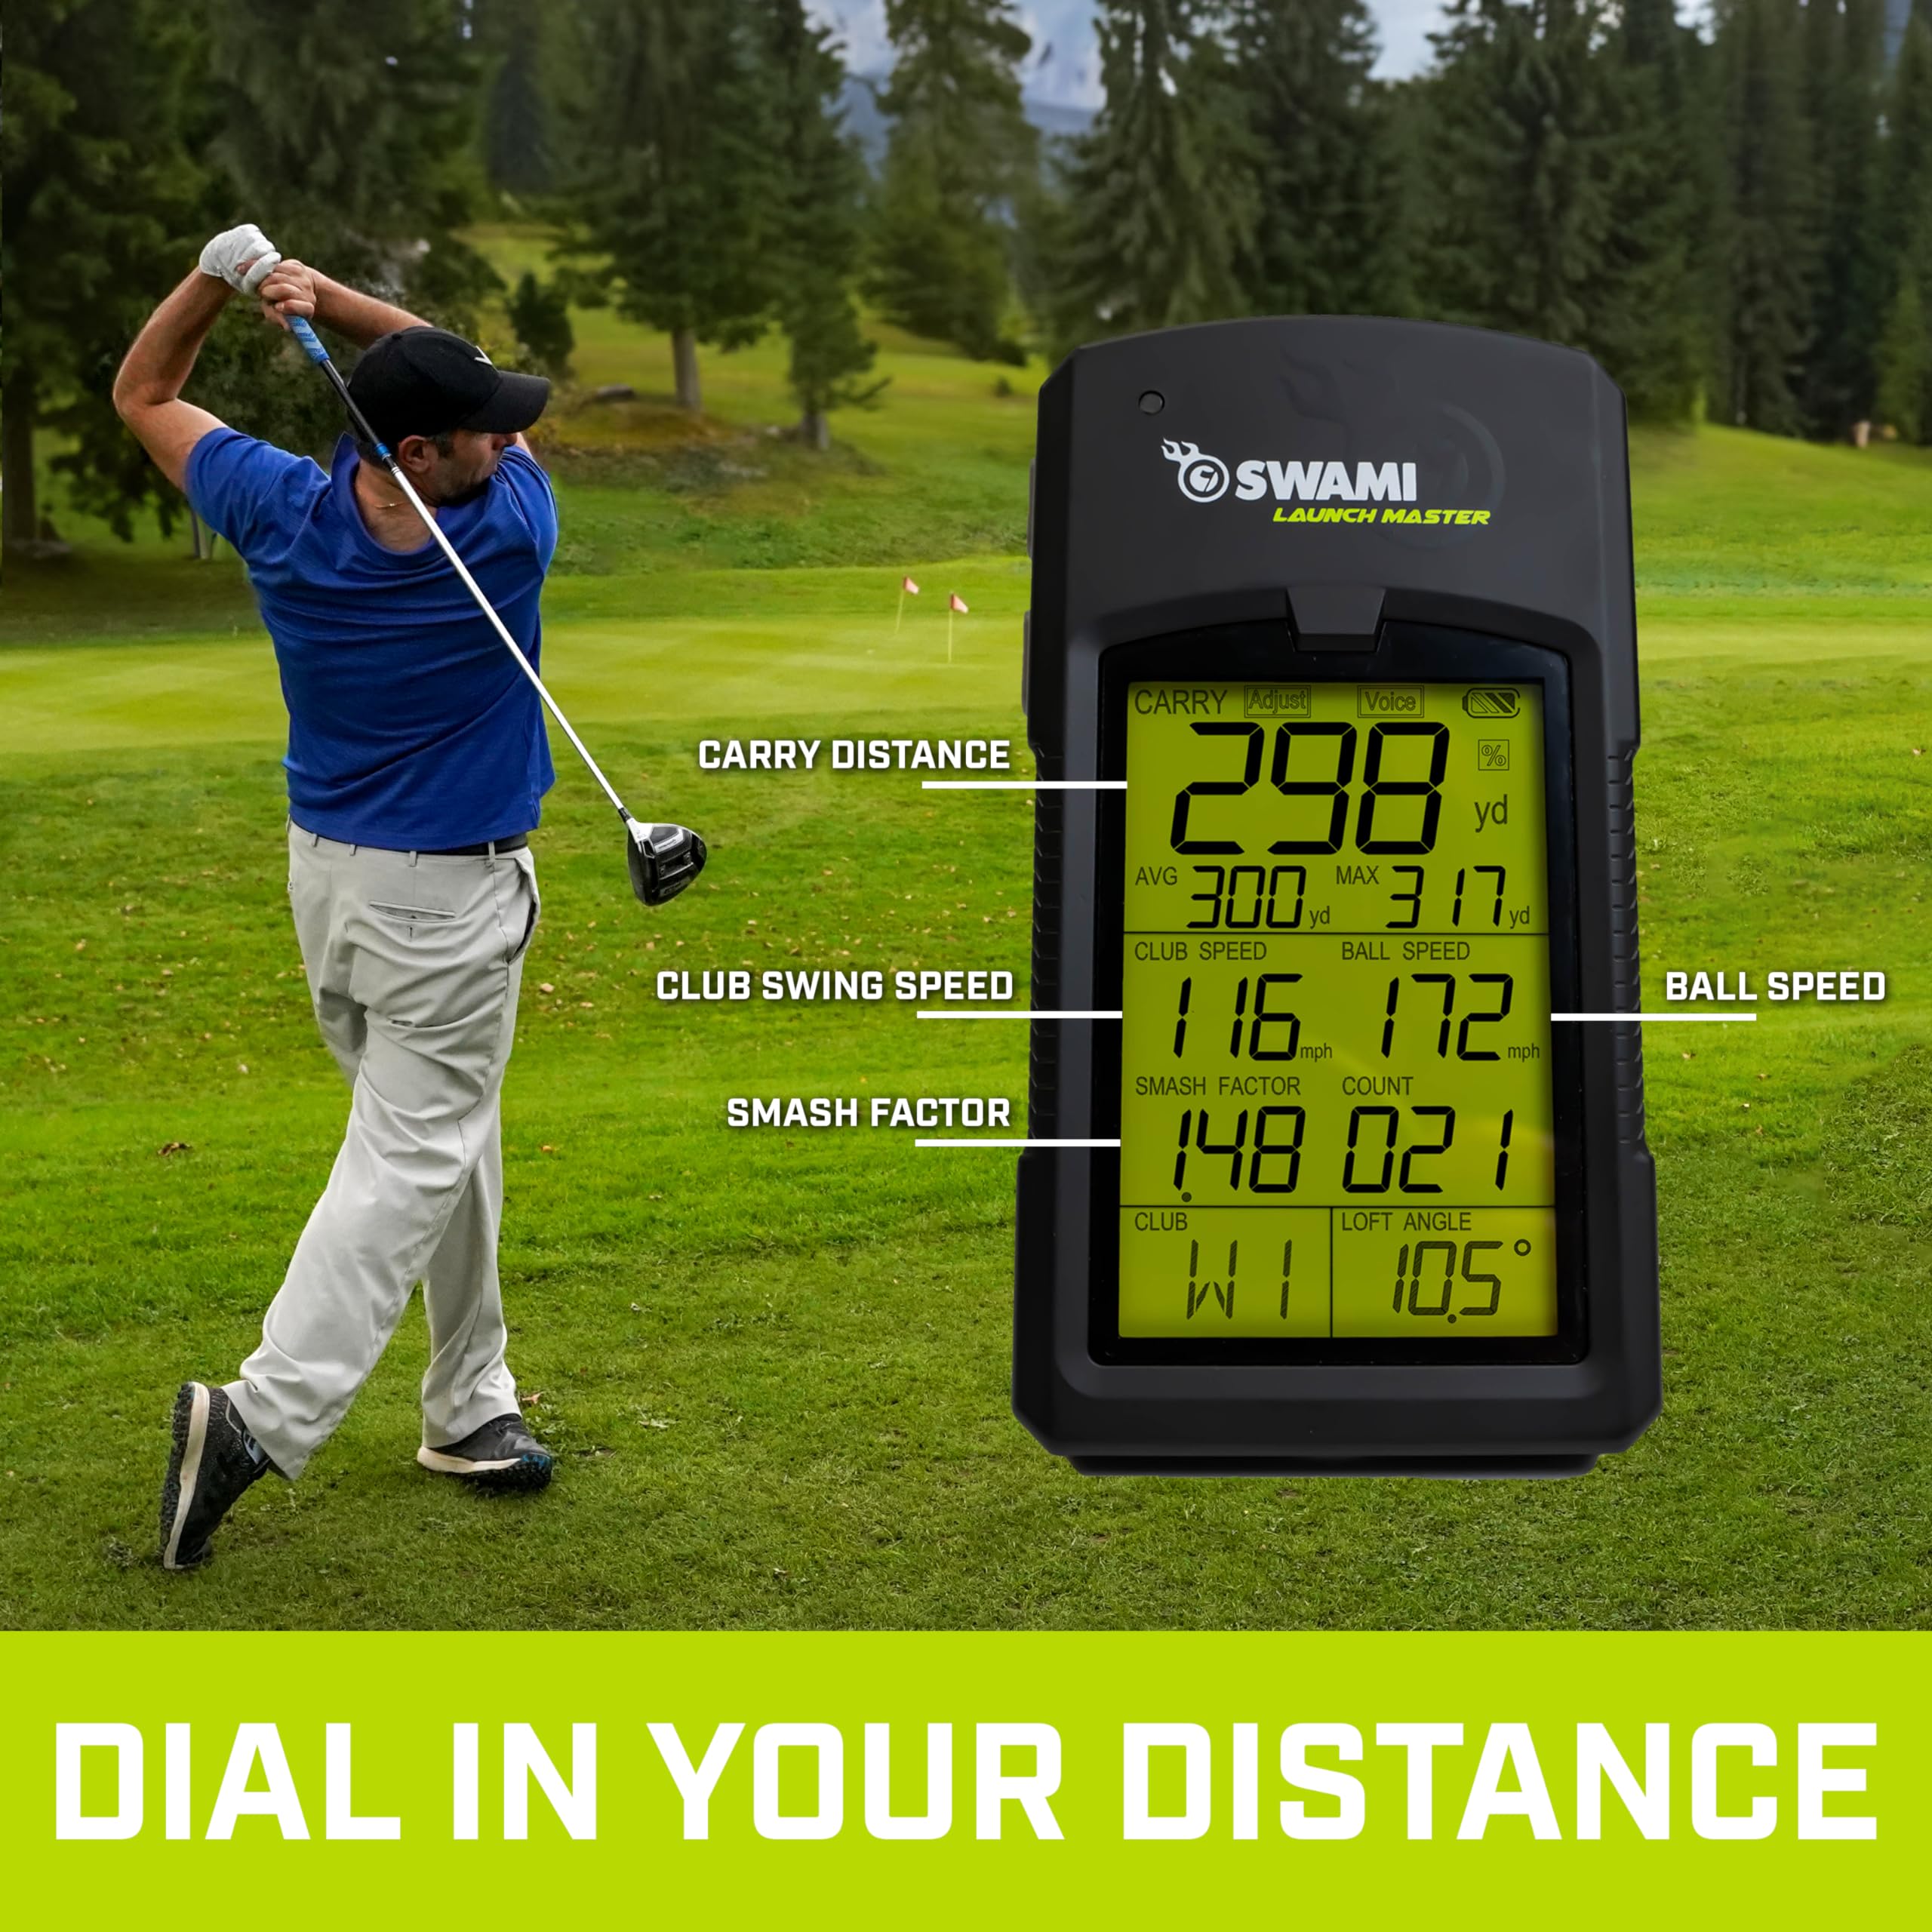 IZZO Golf Launch Master Golf Launch Monitor - Golf Training aid Swing Simulator for Tracking Ball Speed, Smash Factor, Carry Distance, Swing Speed